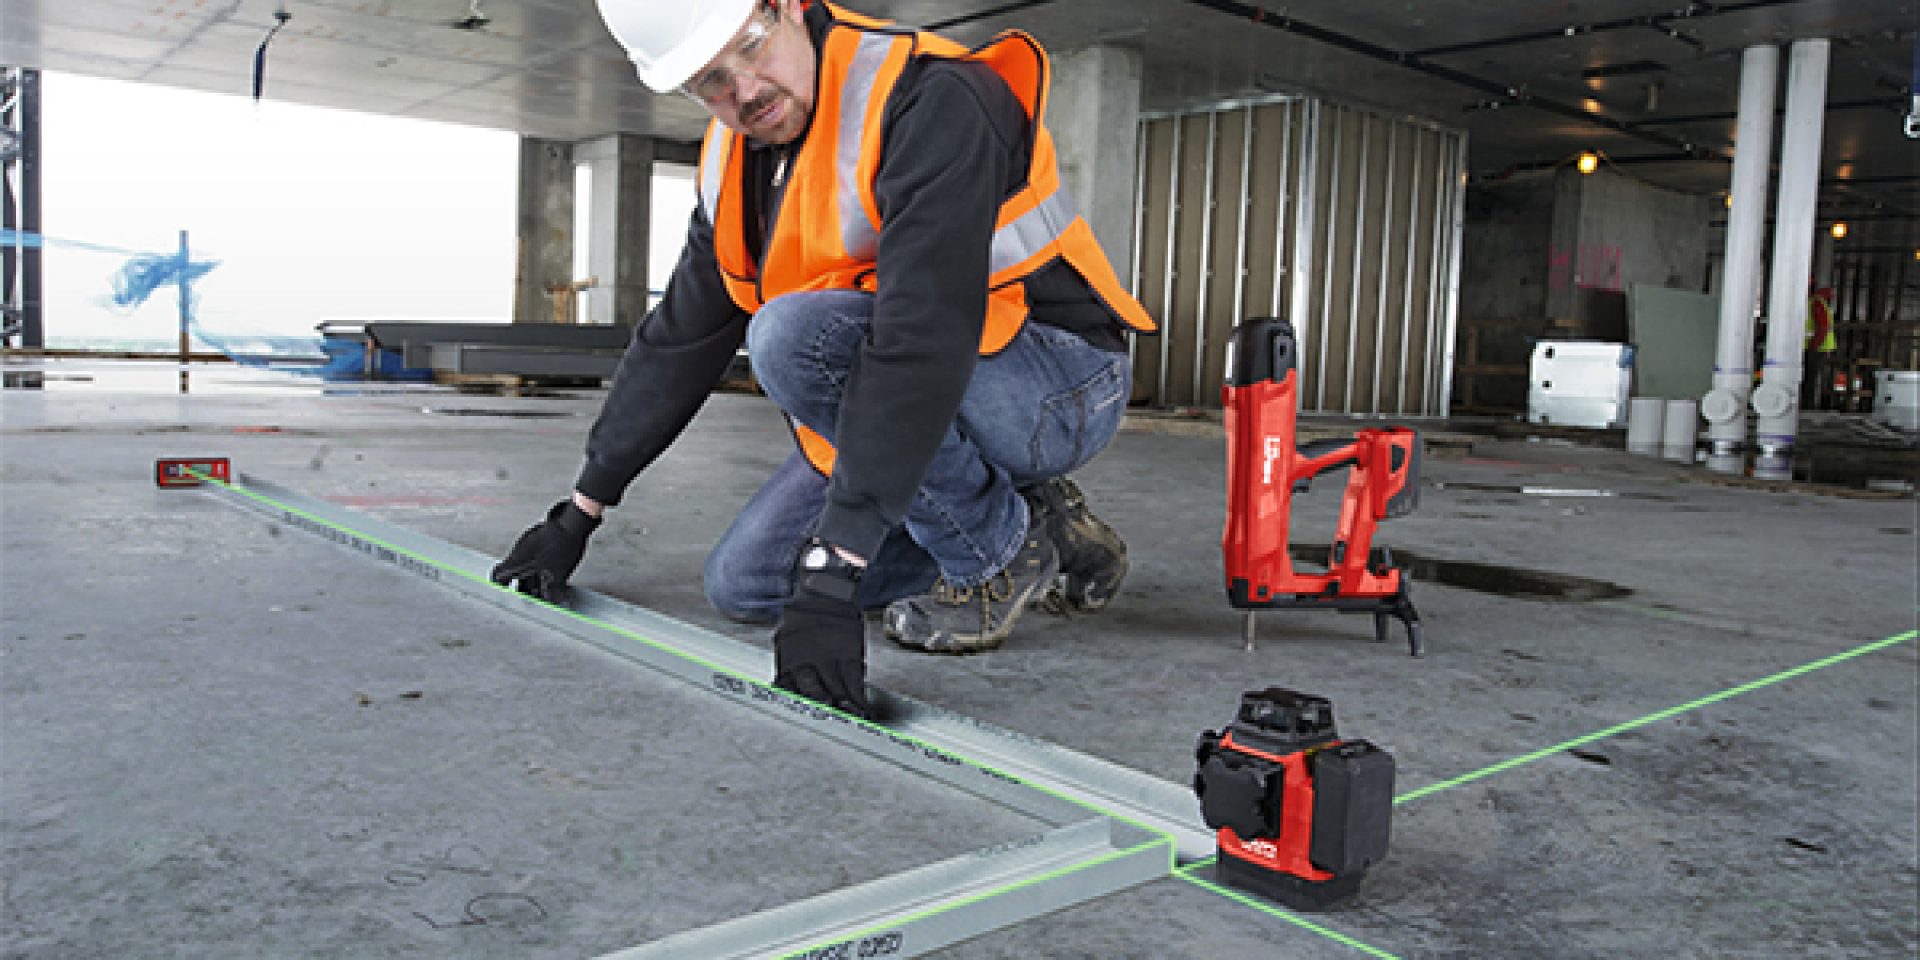 The PM 30-MG is perfectly designed for laying out drywall tracks